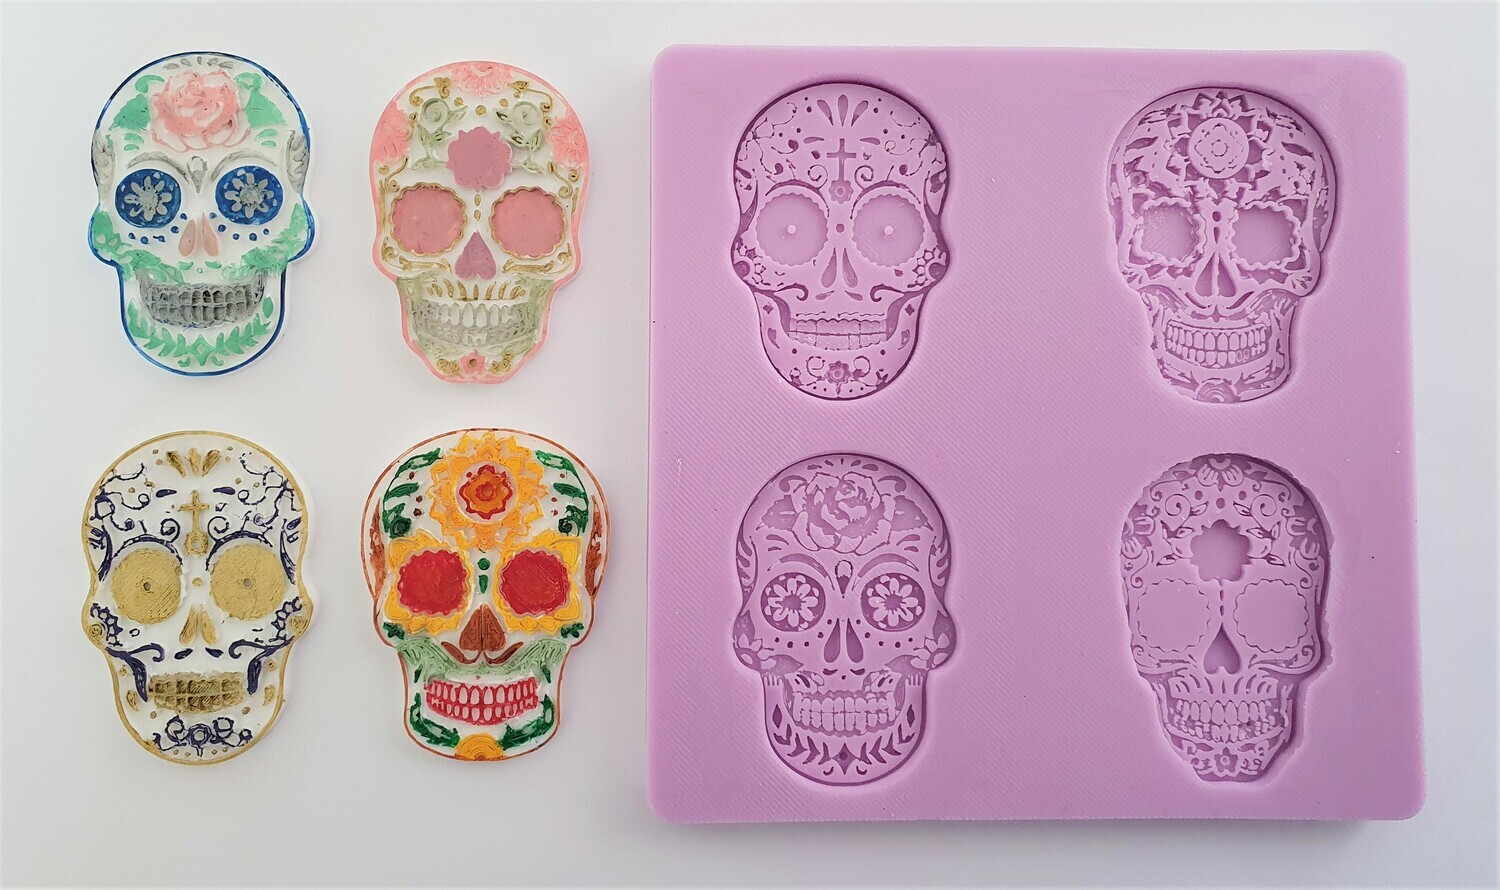 HALLOWEEN DAY OF THE DEAD FLORAL SKULLS SET OF 4 SILICONE MOULD